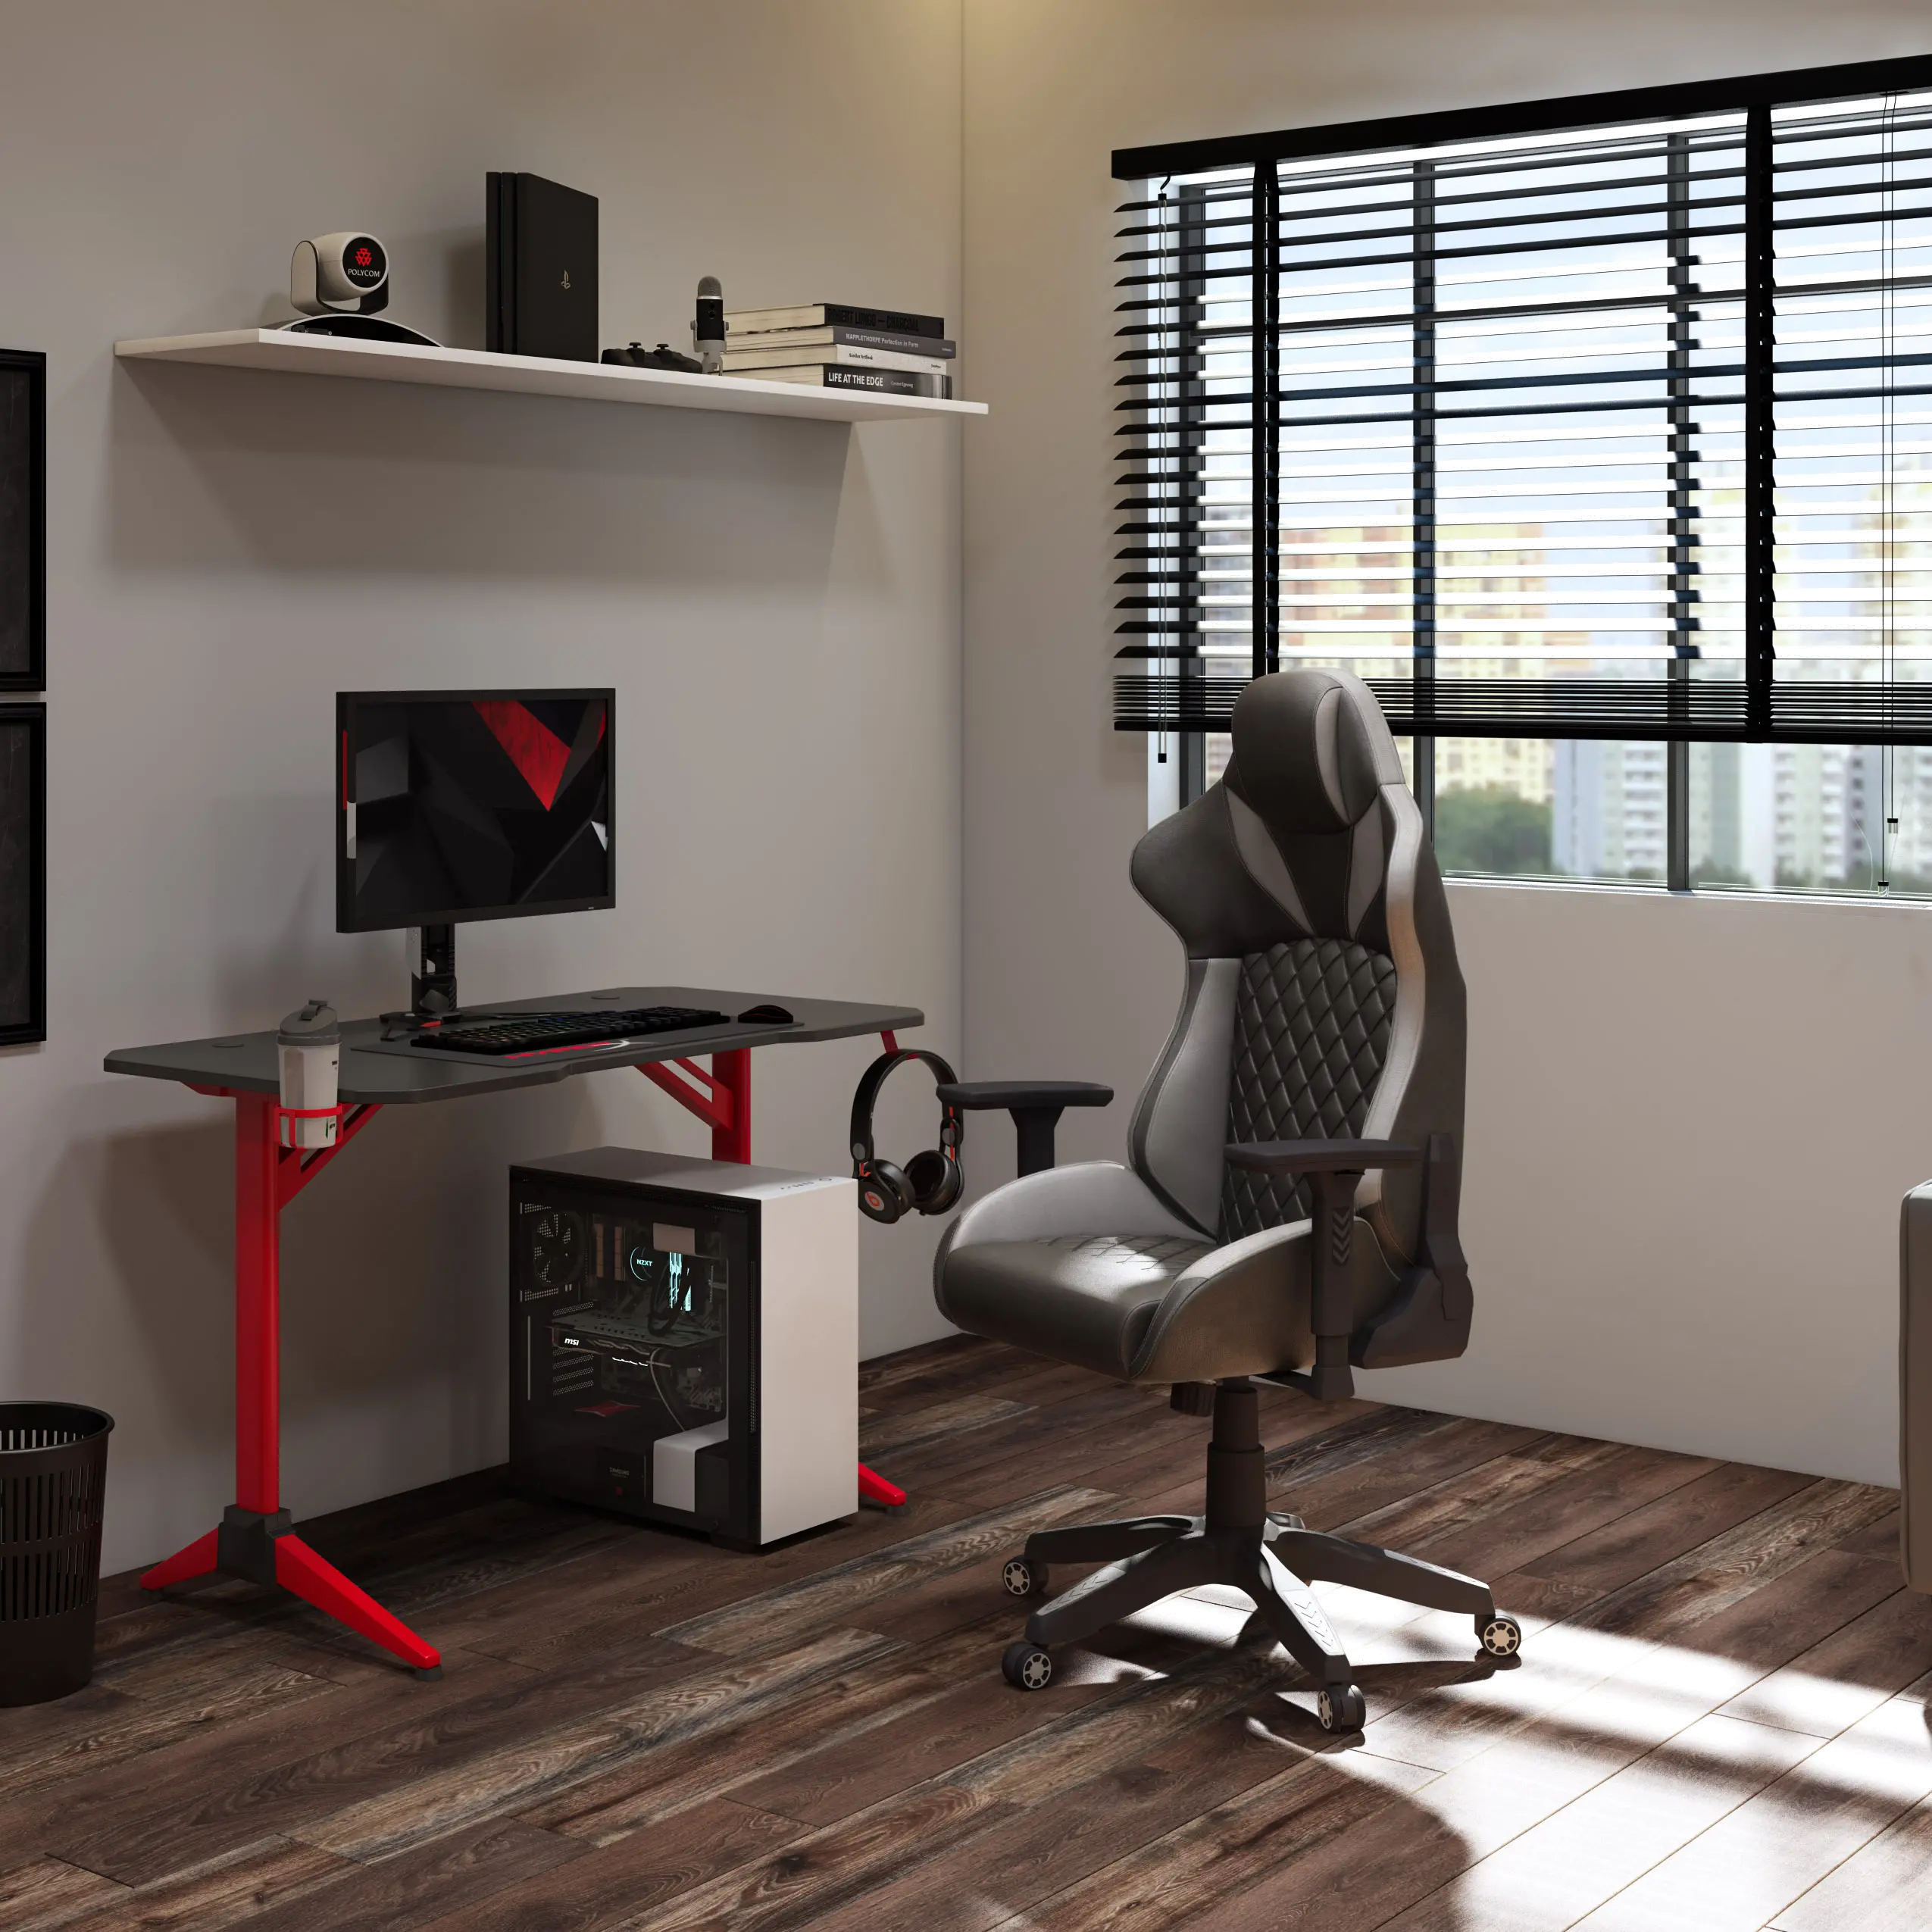 https://static.rcwilley.com/products/112760716/Nightshade-Black-and-Gray-Gaming-Chair-rcwilley-image1.webp